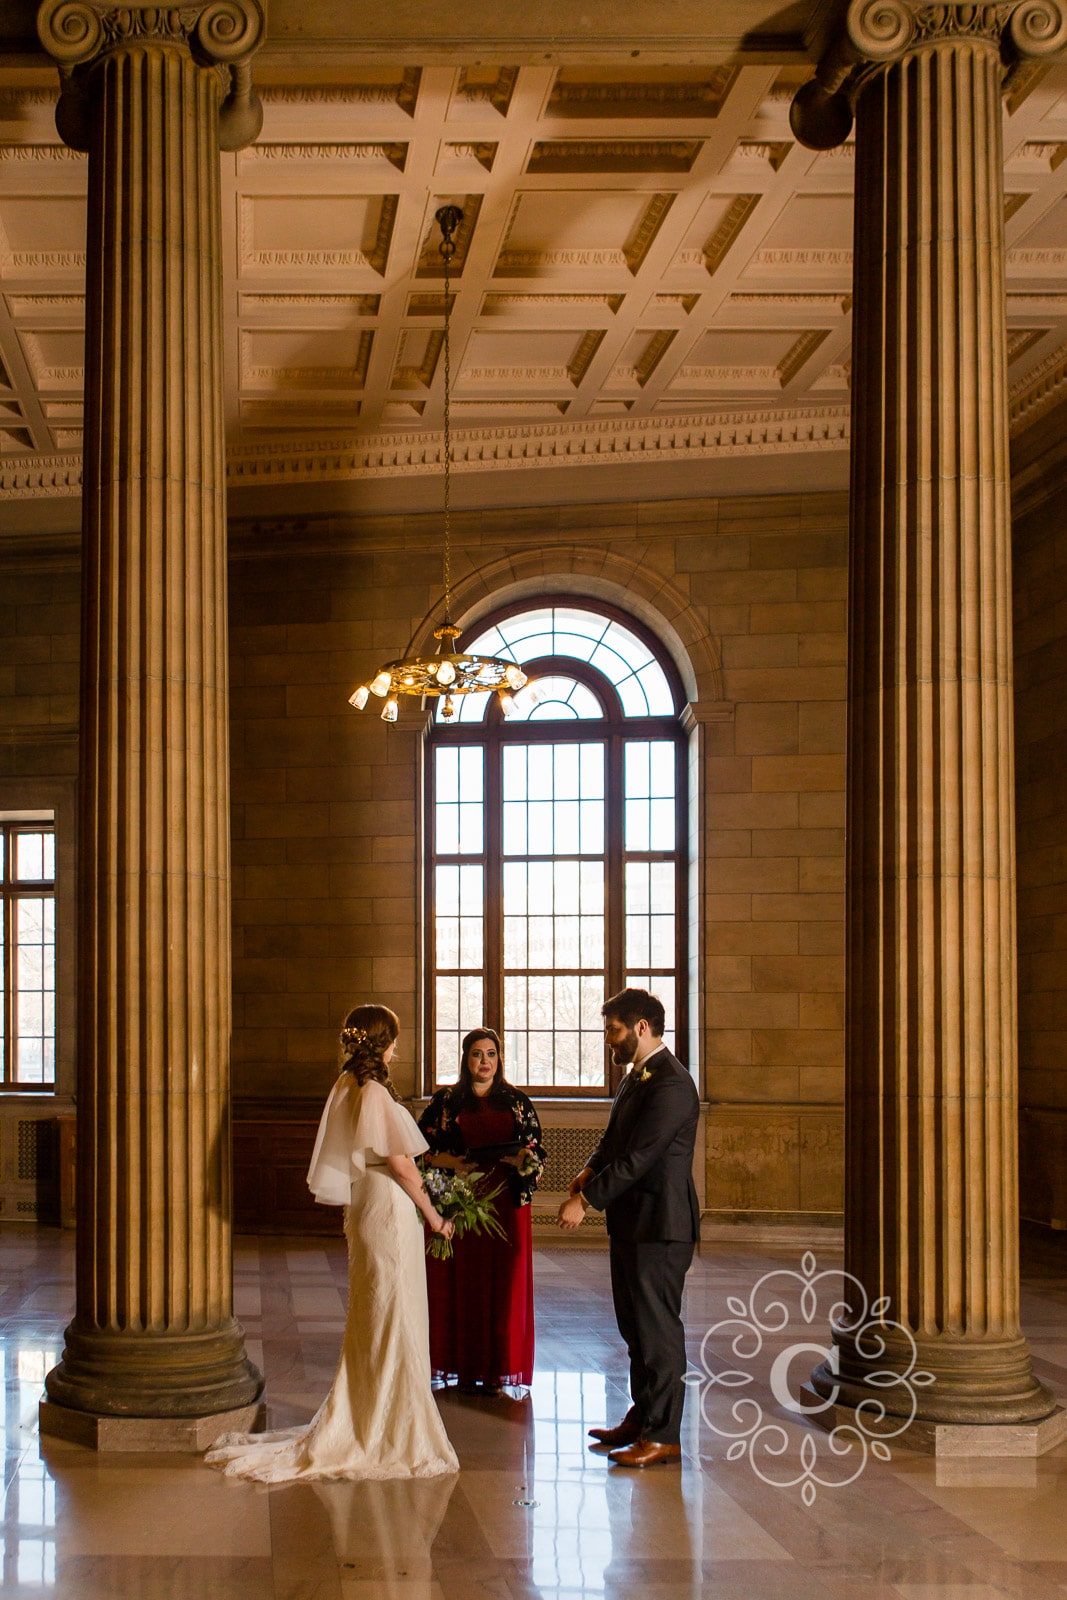 James J Hill Library St Paul Wedding Photography